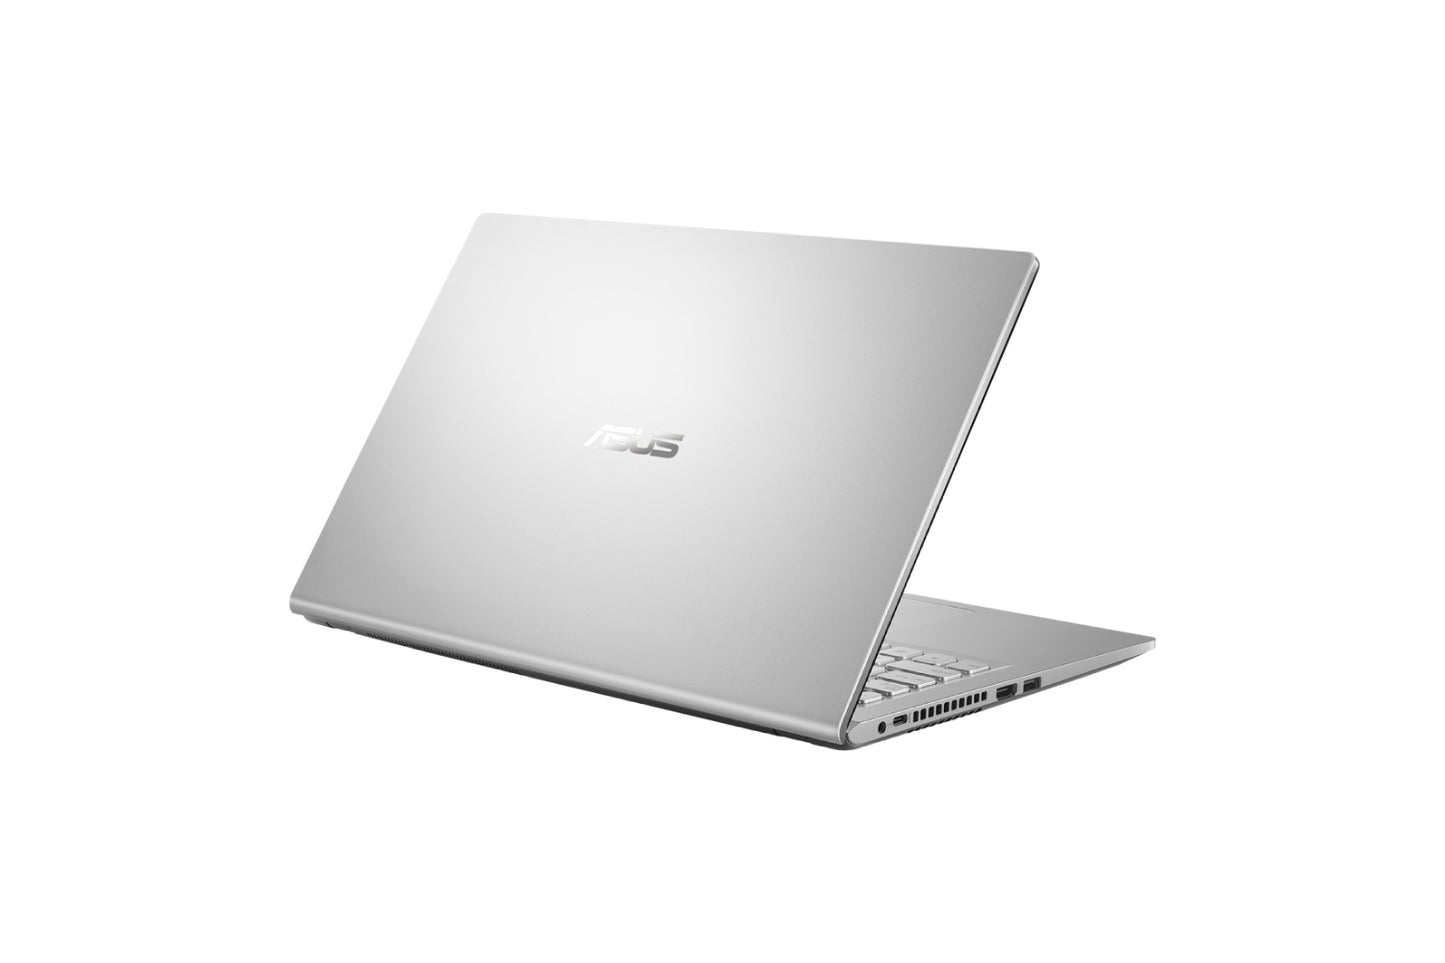 ASUS Vivobook 15.6-inch LED Backlit FHD (1920 x 1080) Anti-glare Display Intel i5 11th Gen 8GB RAM 512GB nvme SSD with Windows 11 + MS Office Laptop - X515EA-EJ522WS-Laptops-ASUS-computerspace